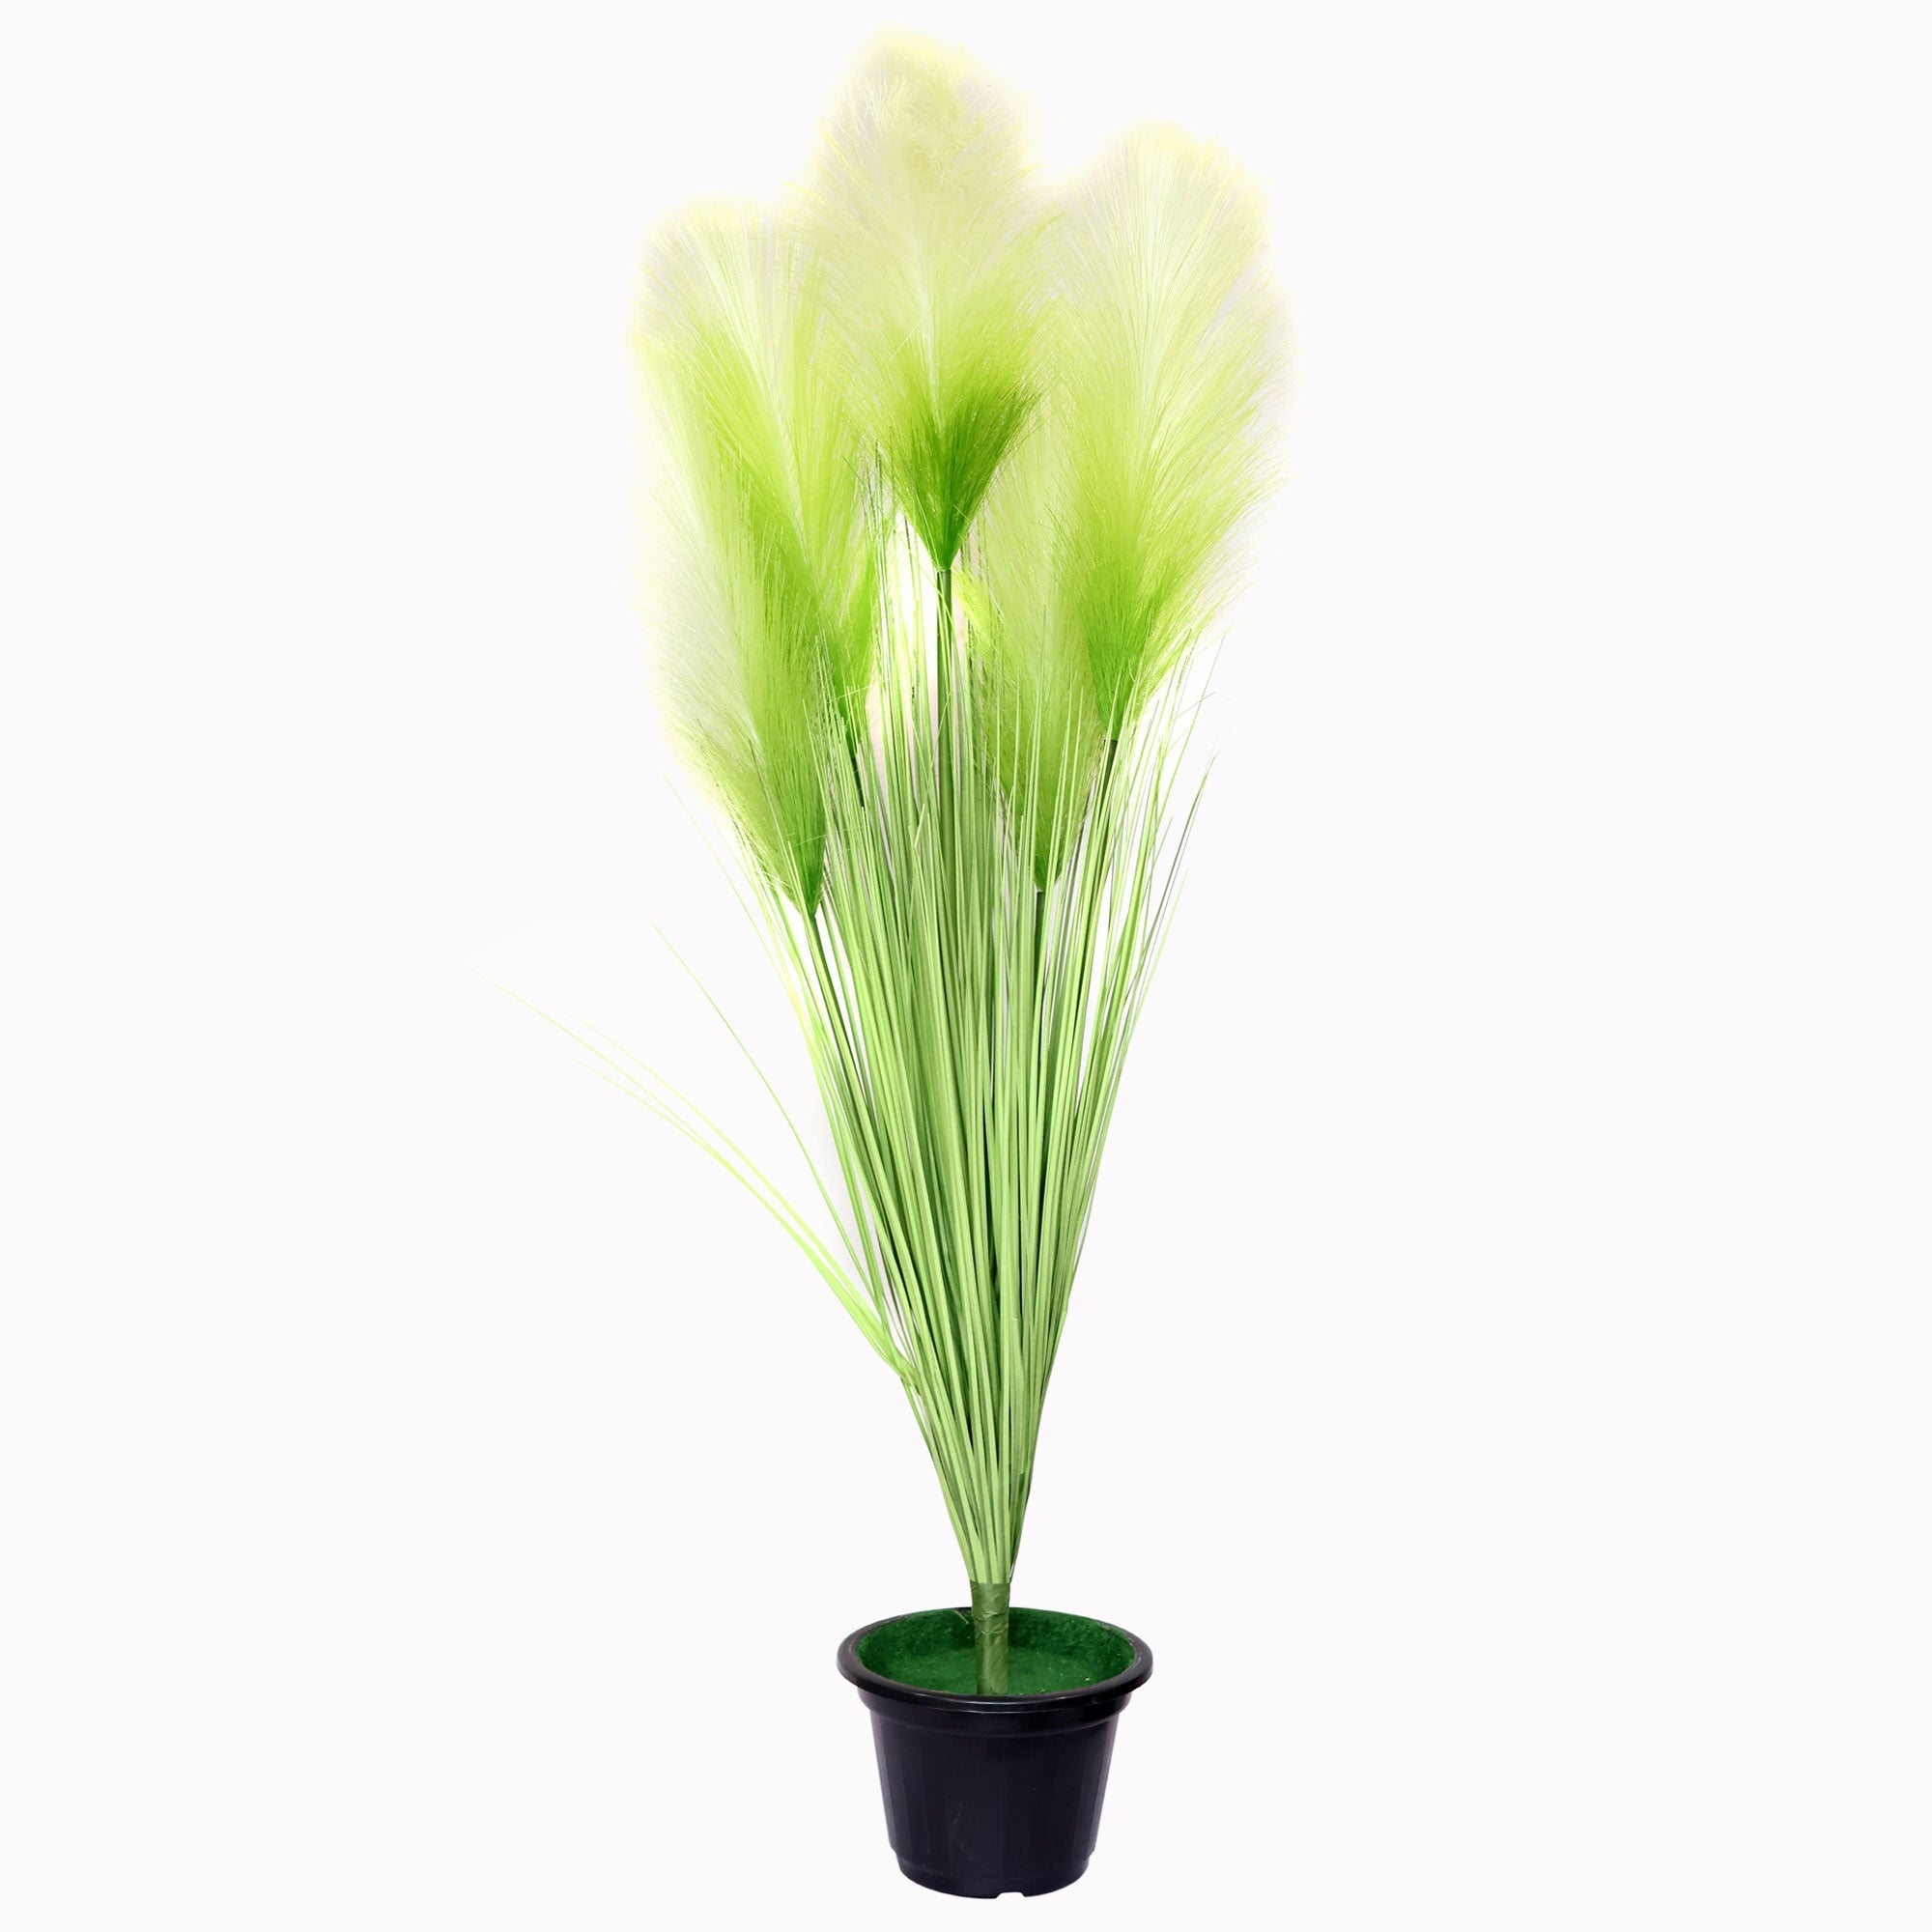 AAVANA GREENS 38.4" Artificial Greenery Floor Plants with Reed Flowers, Faux Pampas Grass Silk Plants for House Decorations, Lobby, Bathroom, Wedding, Garden